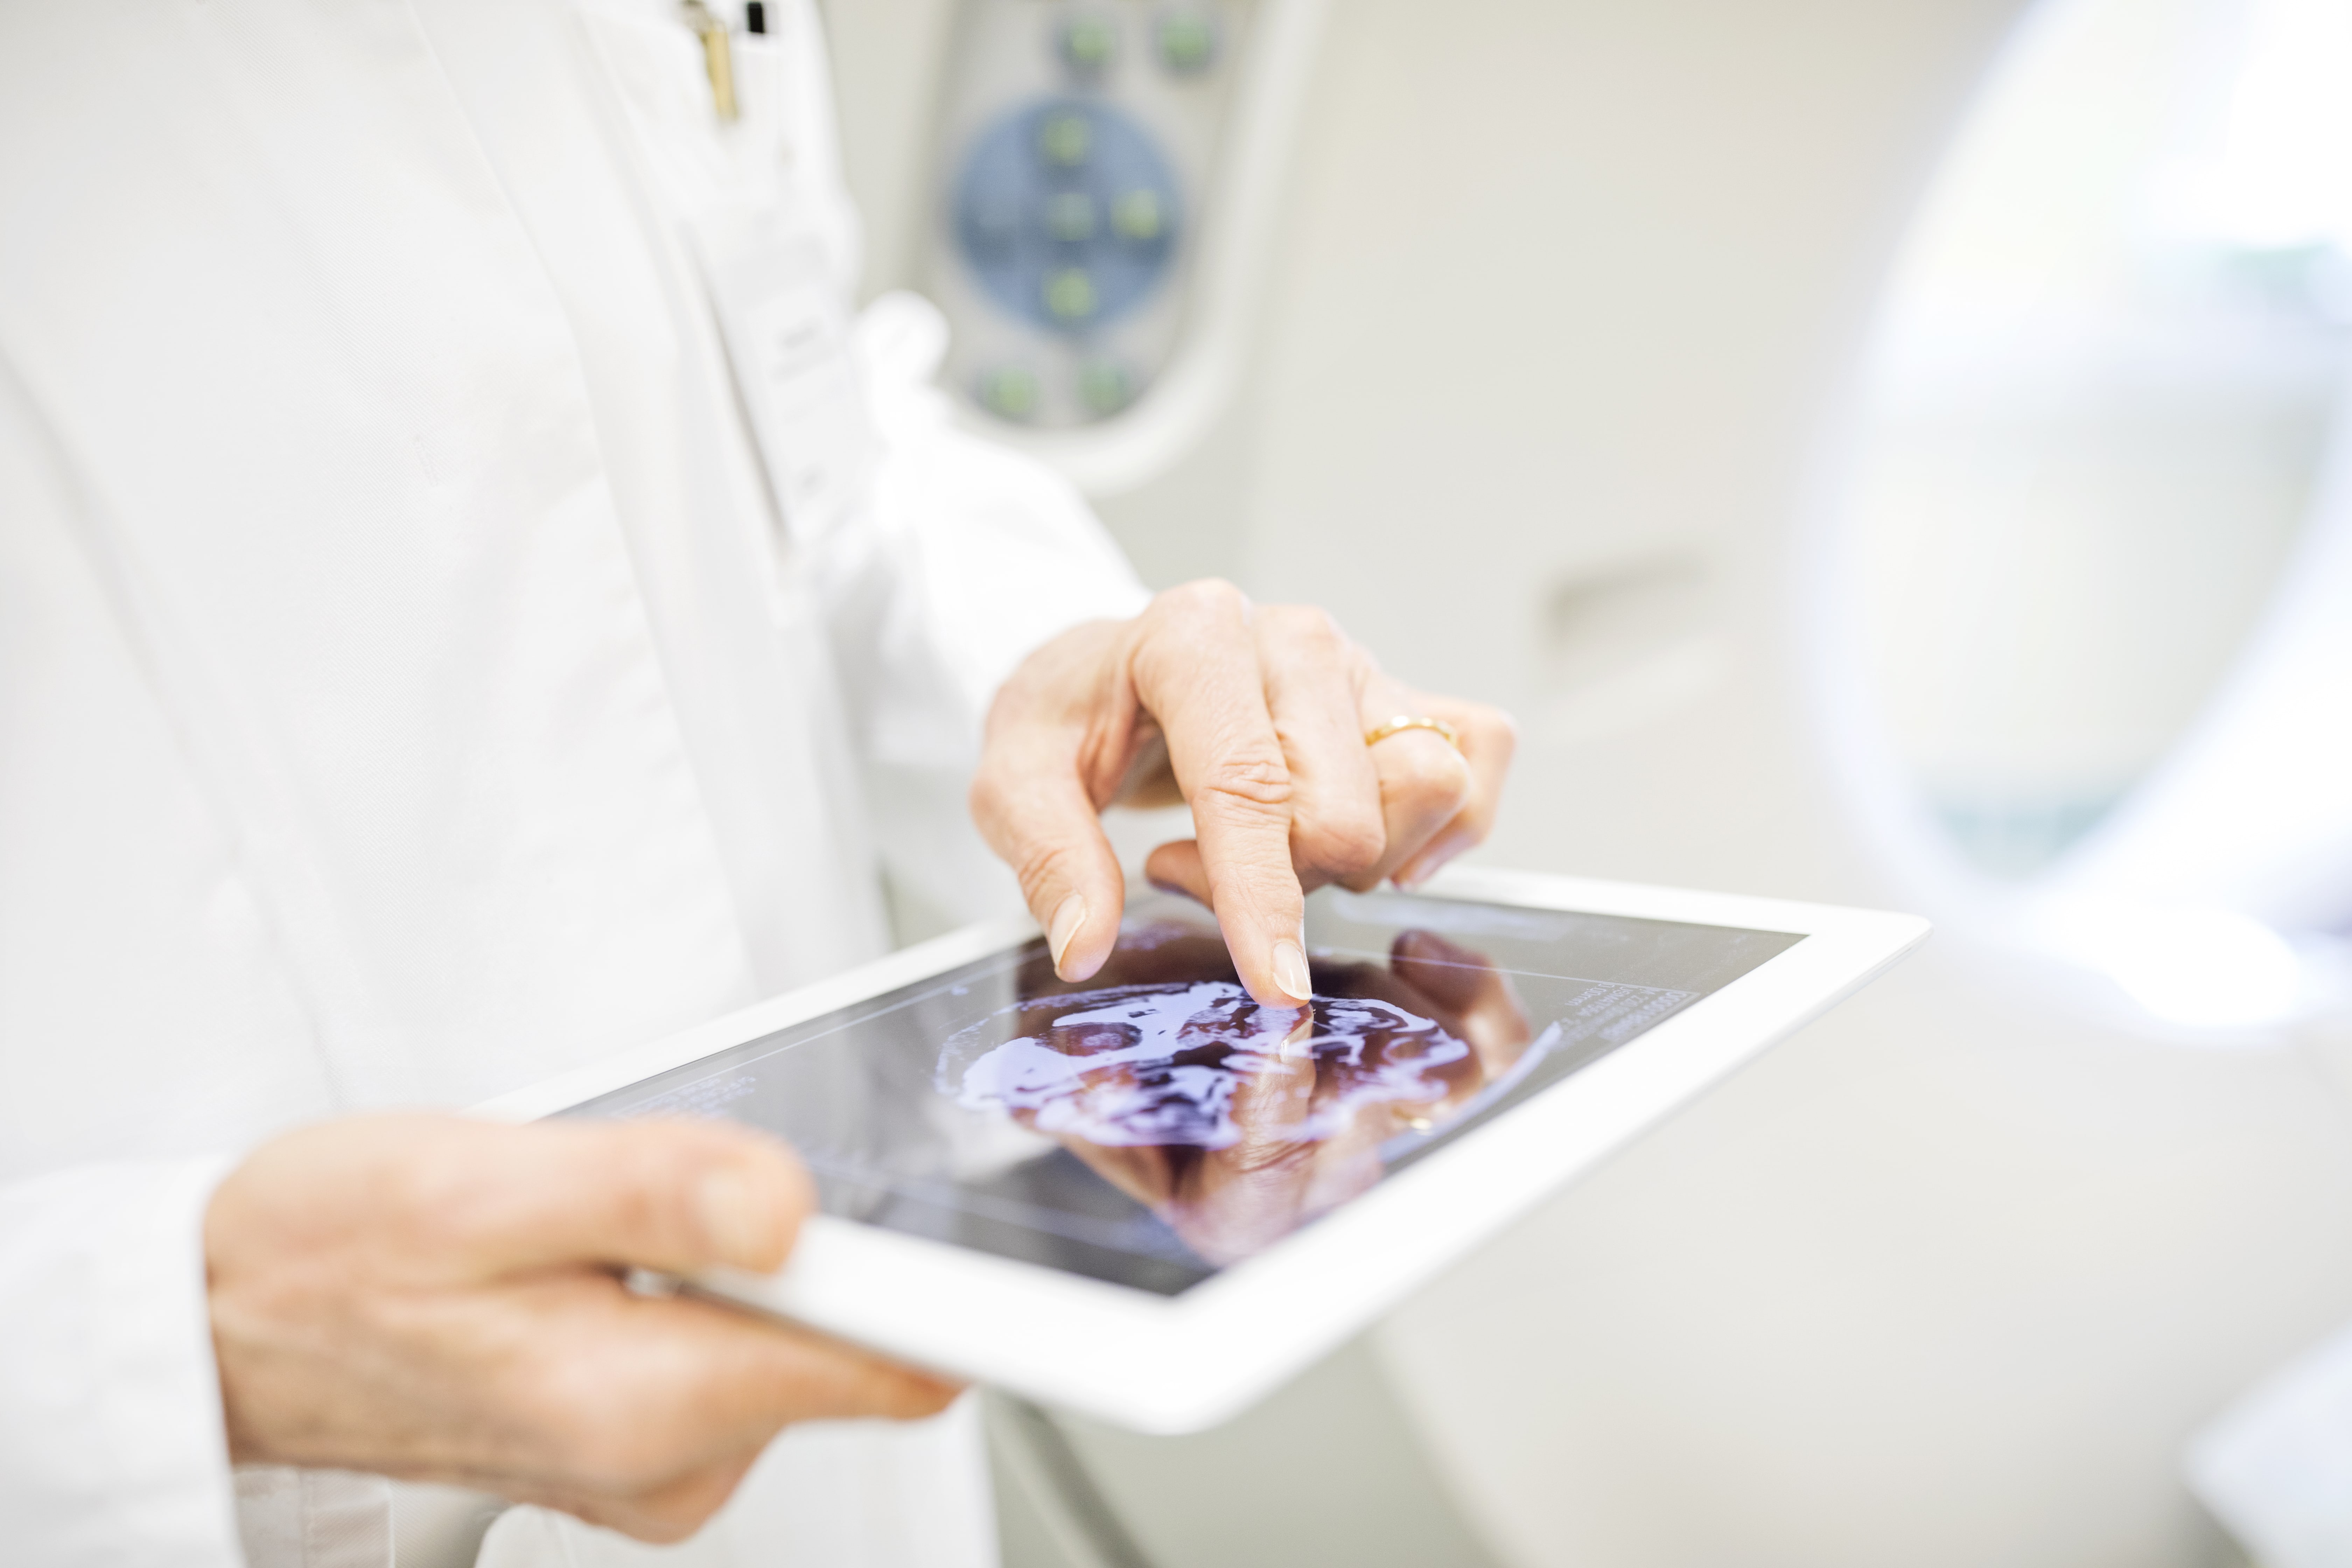 Digitalization trends in the health care industry